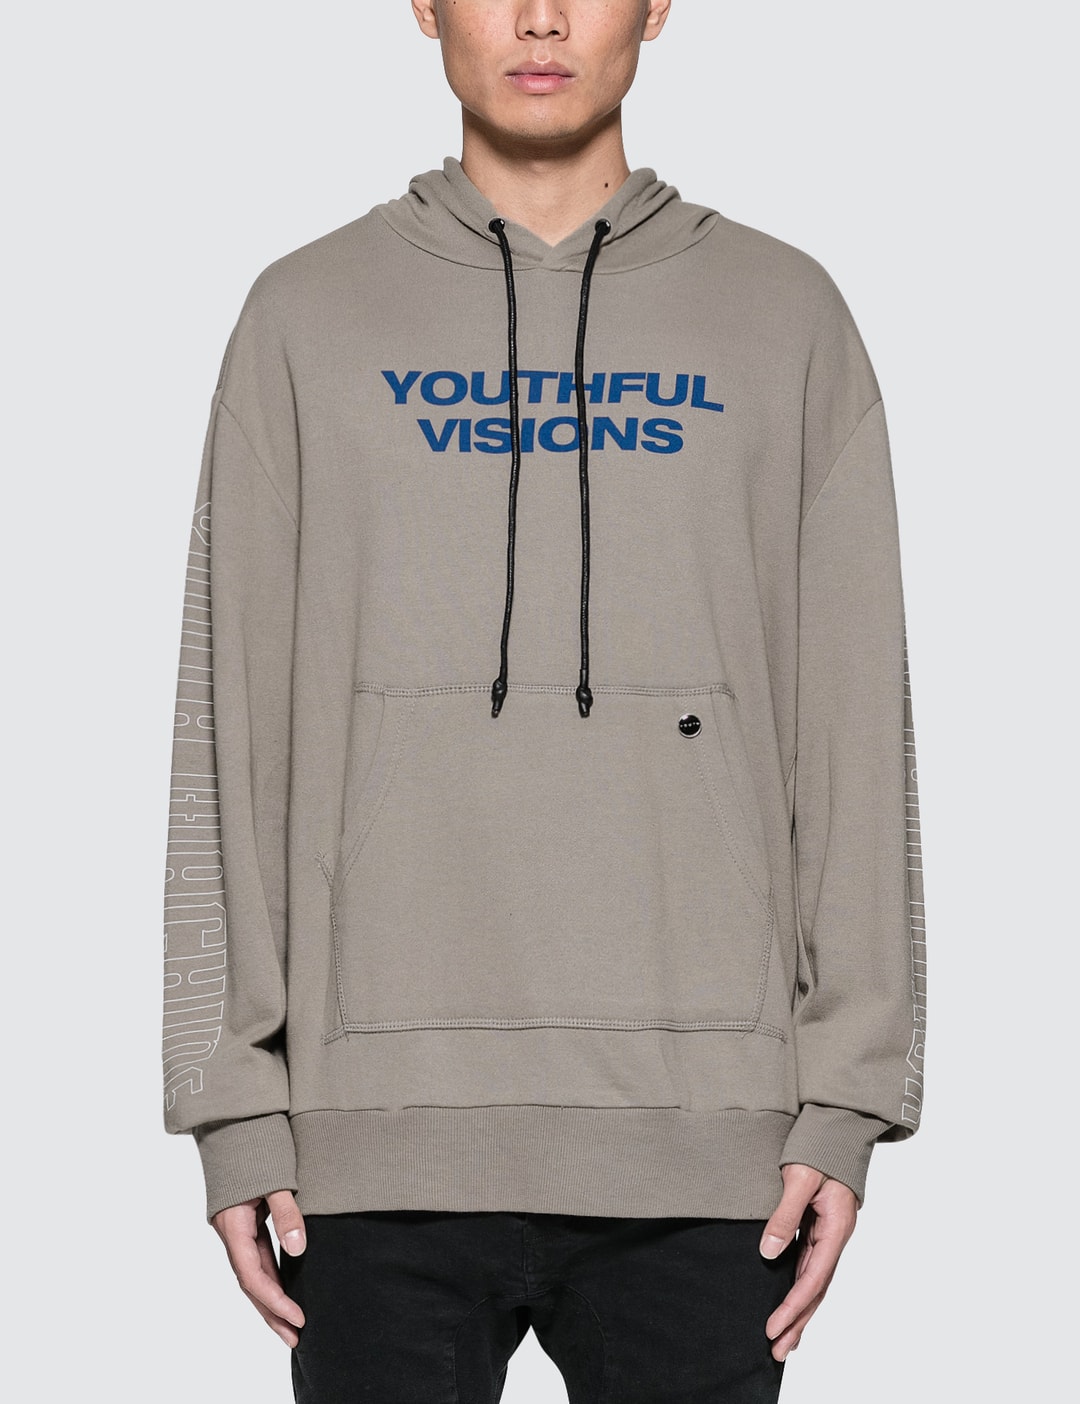 Youth Machine - Visions Hoodie | HBX - Globally Curated Fashion and ...